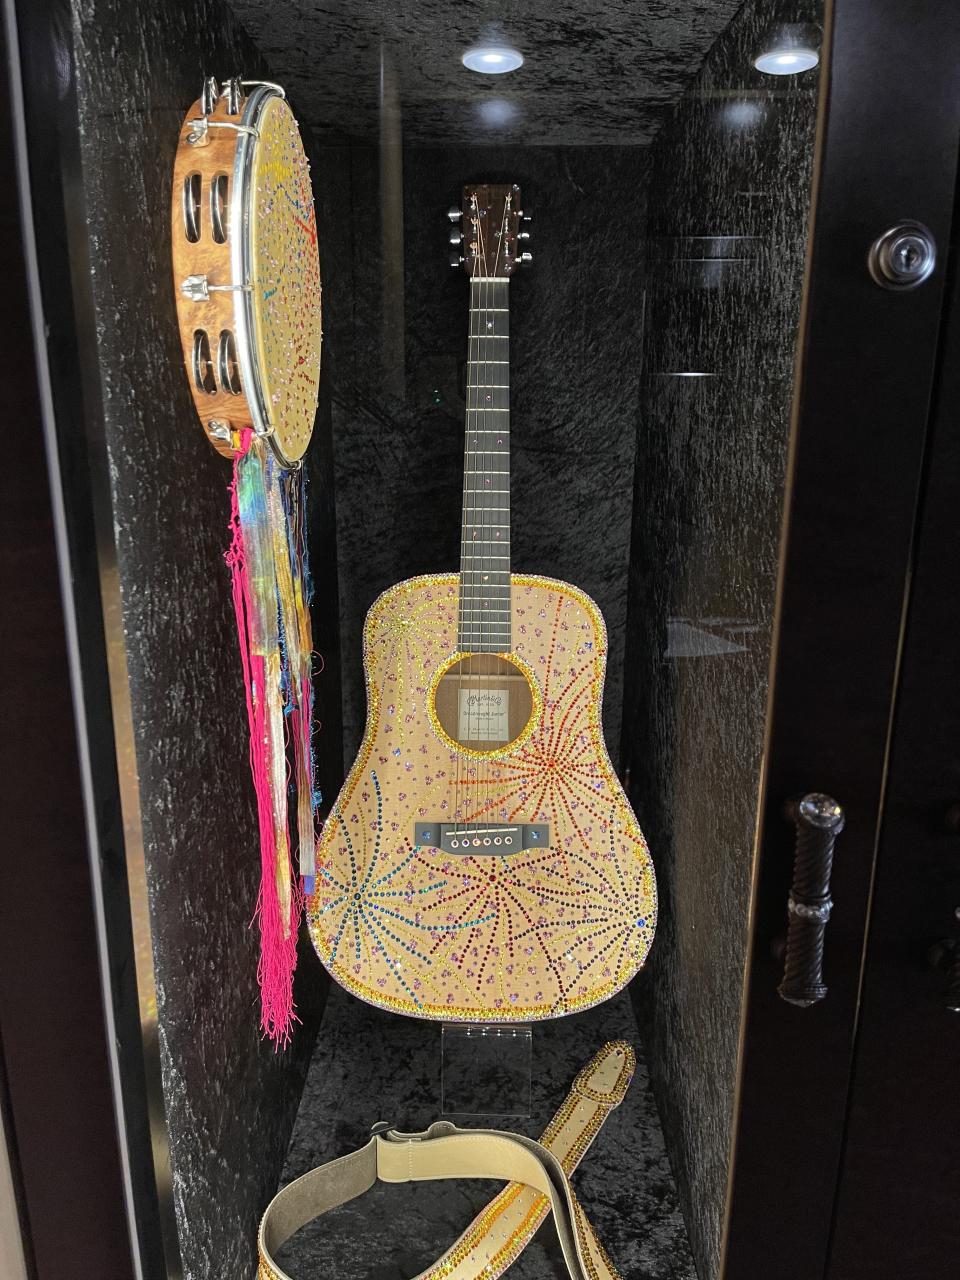 Parton played this sparkly guitar on Netflix's Dolly Parton's Heartstrings.
